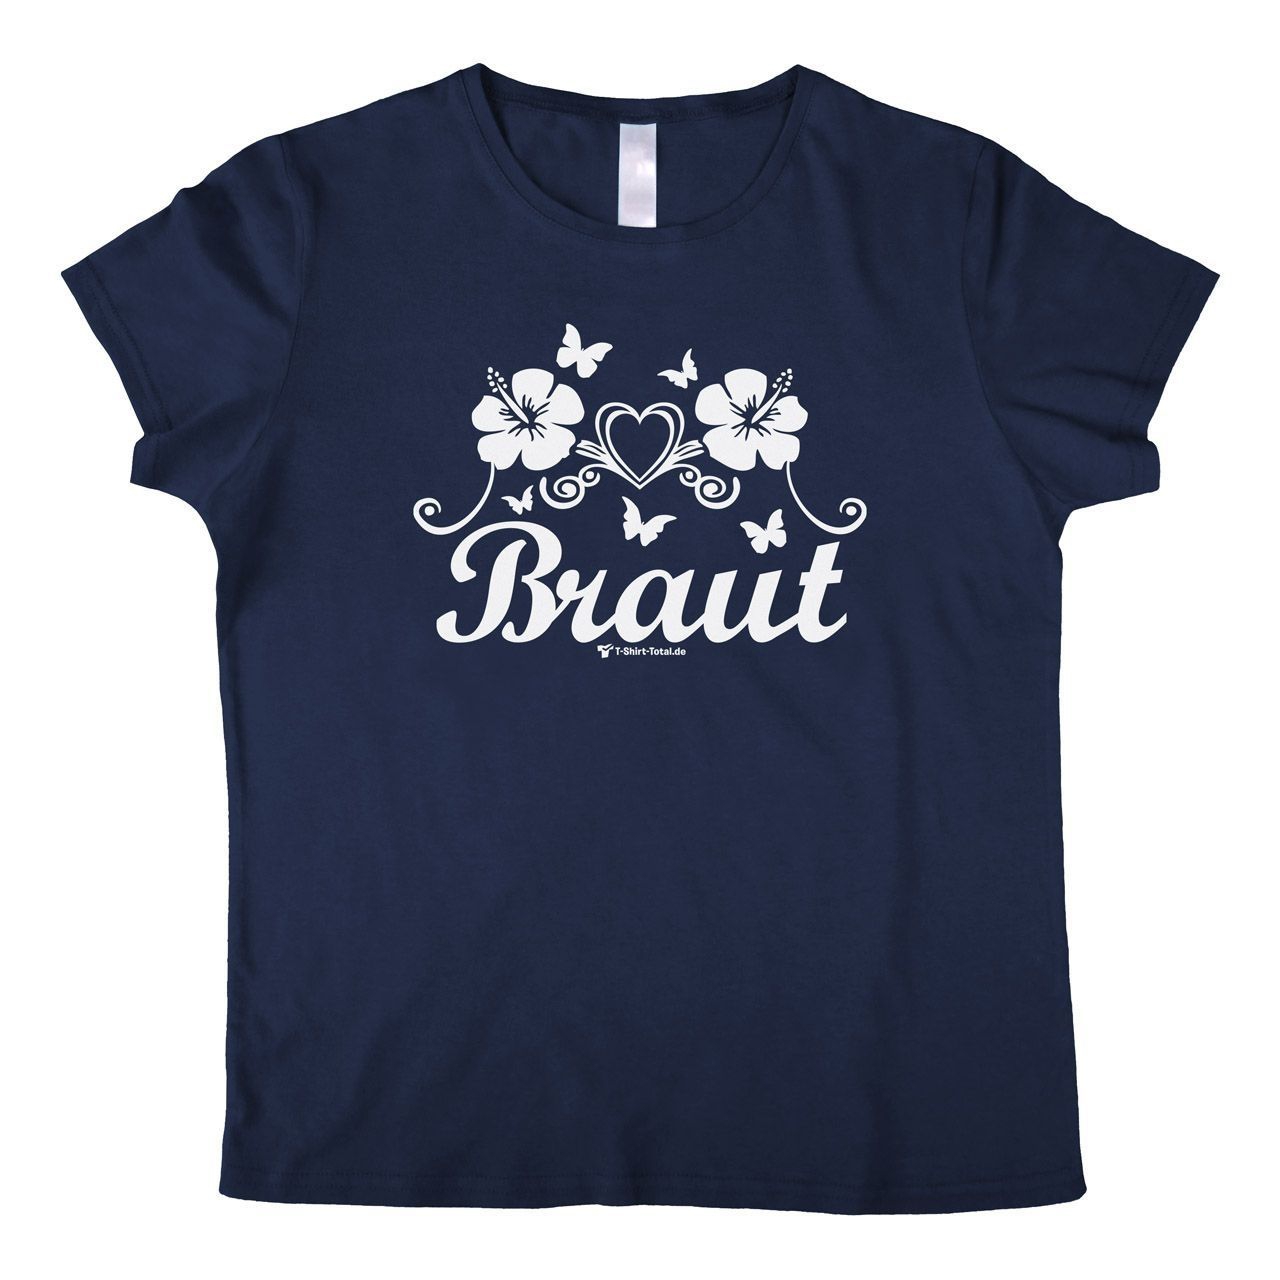 Die Braut Woman T-Shirt navy Extra Large